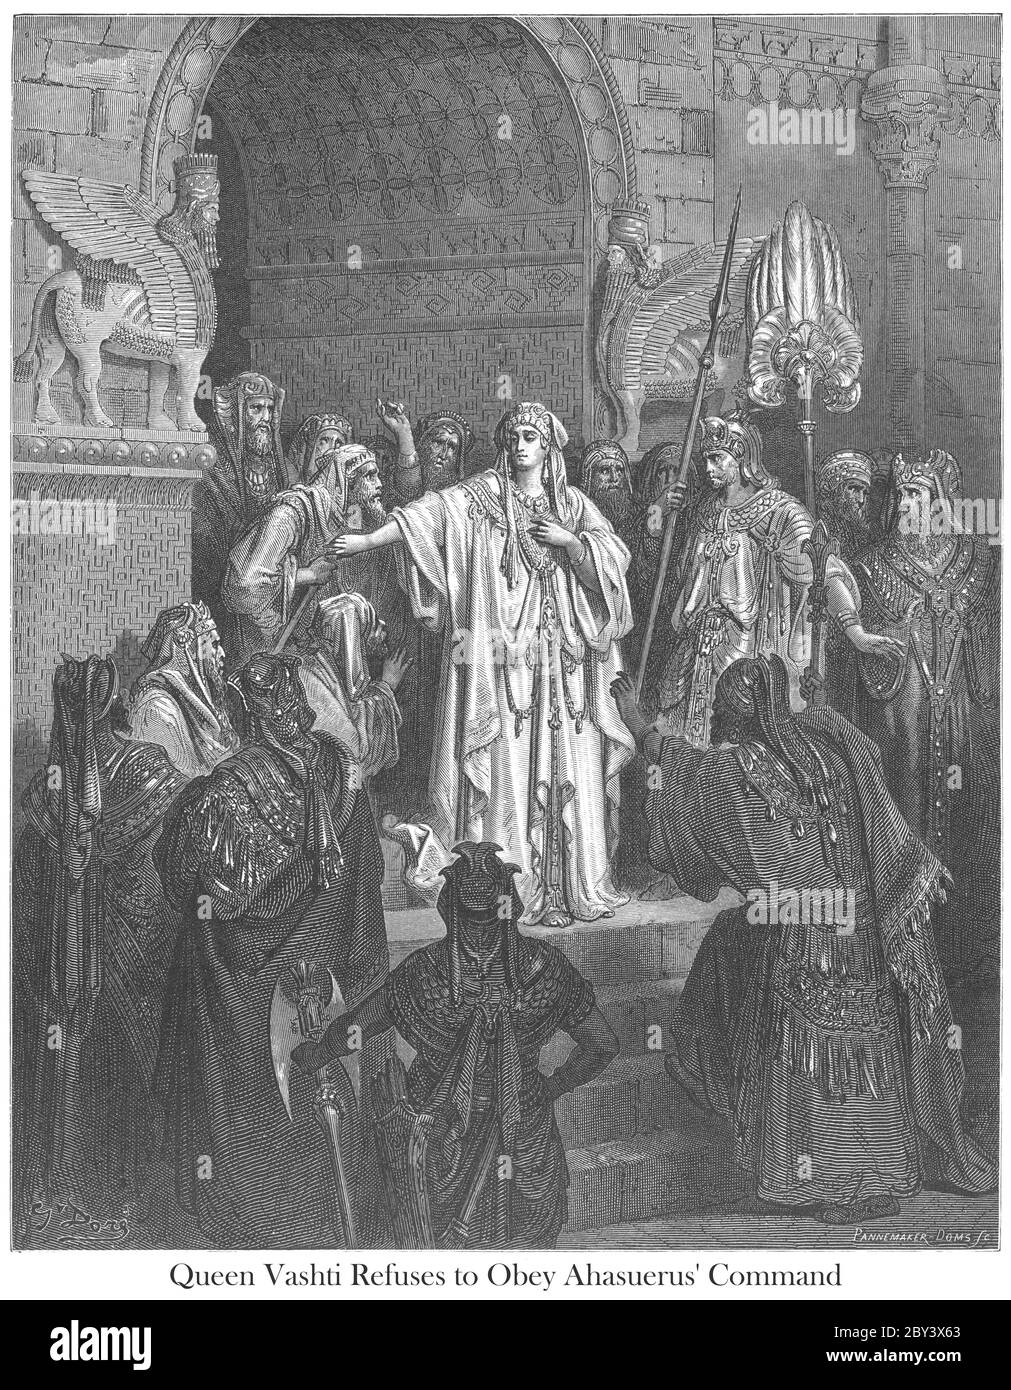 Queen Vashti Refusing to Obey King Ahasuerus Esther 1:11-12 From the book 'Bible Gallery' Illustrated by Gustave Dore with Memoir of Dore and Descriptive Letter-press by Talbot W. Chambers D.D. Published by Cassell & Company Limited in London and simultaneously by Mame in Tours, France in 1866 Stock Photo